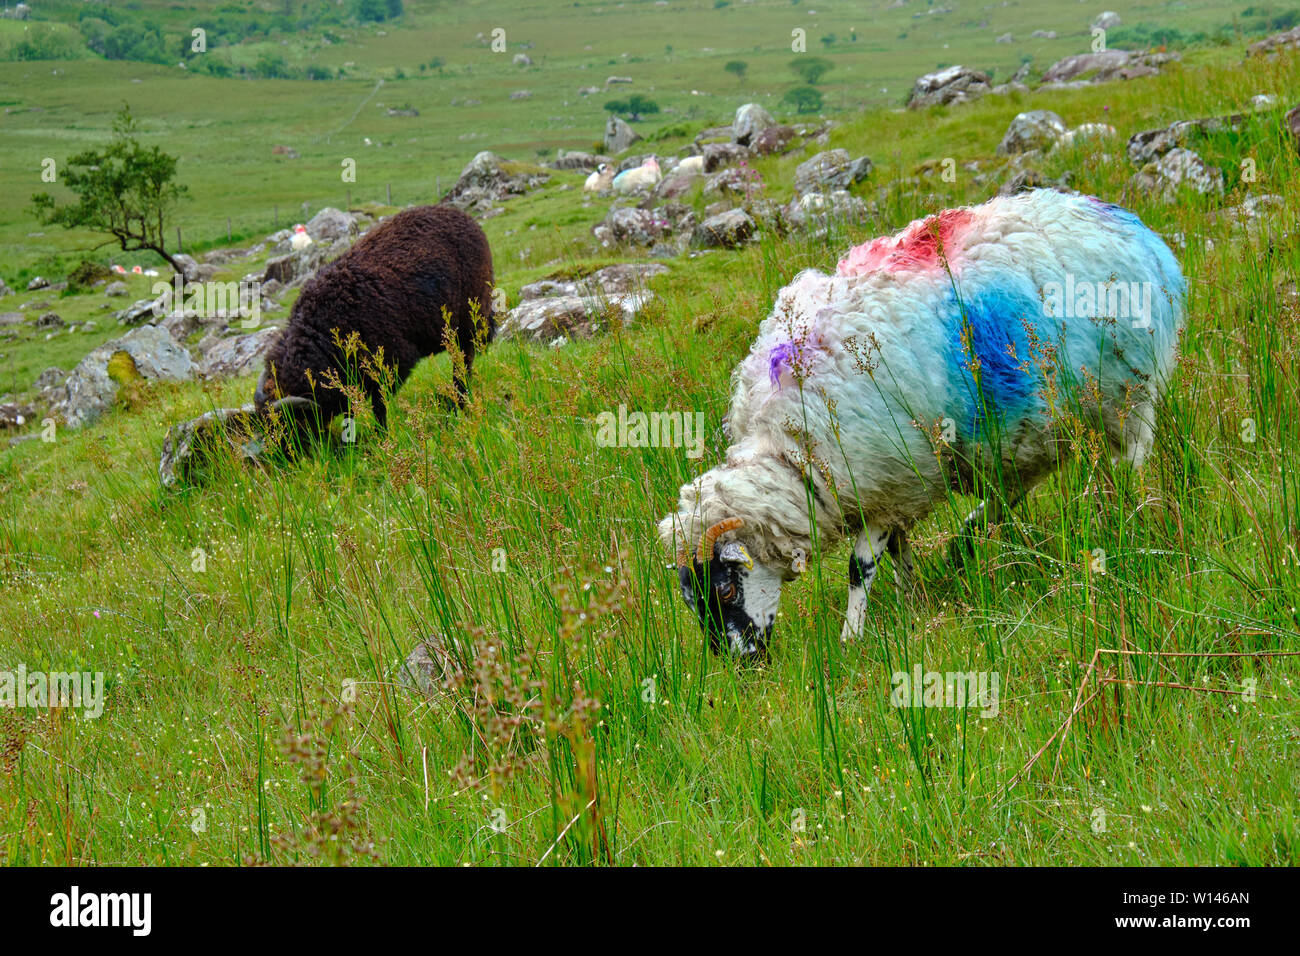 Two horned sheep grazing in Irish pasture.  One black sheep and one white sheep with multicoloured identification marks Stock Photo